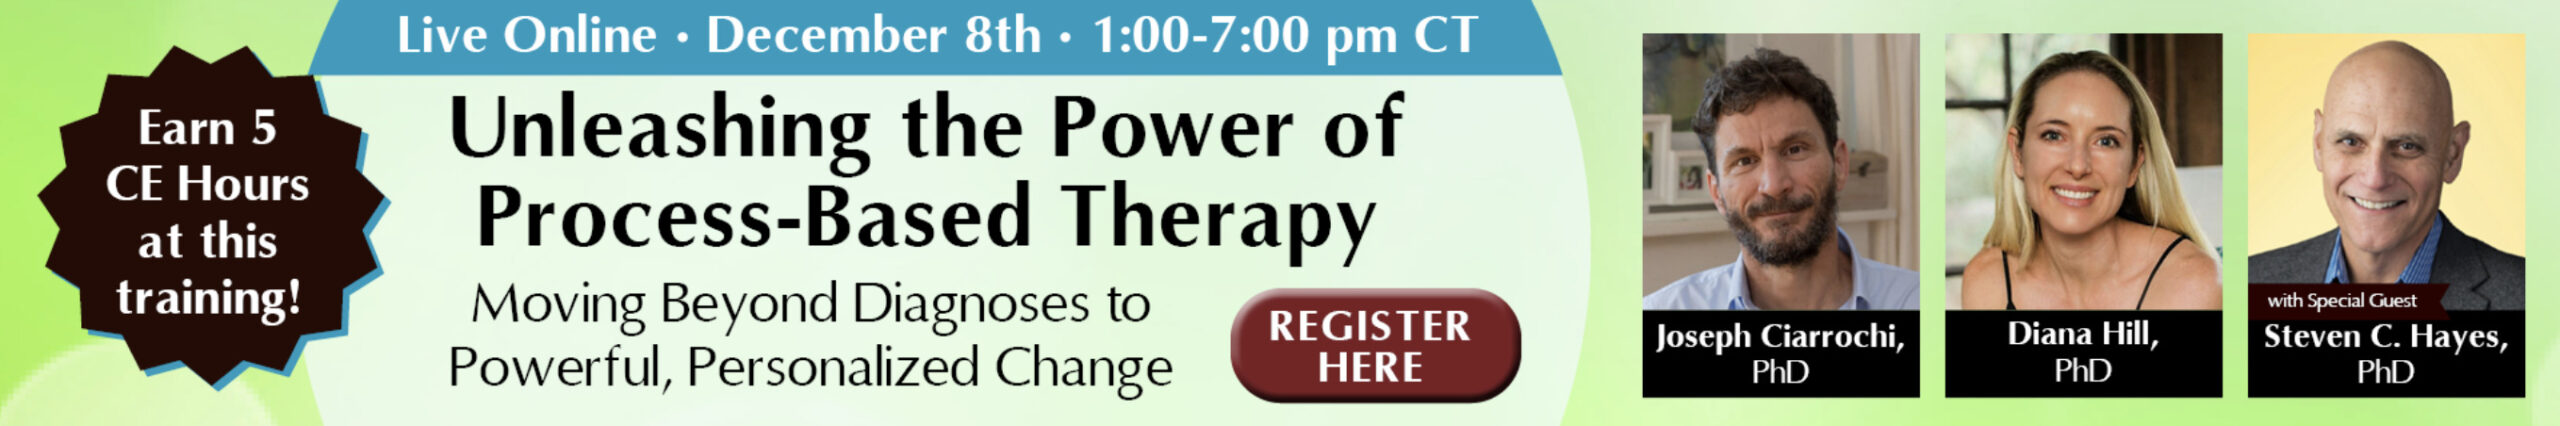 Unleashing the Power of Process-Based Therapy Moving Beyond Diagnoses to Powerful, Personalized Change